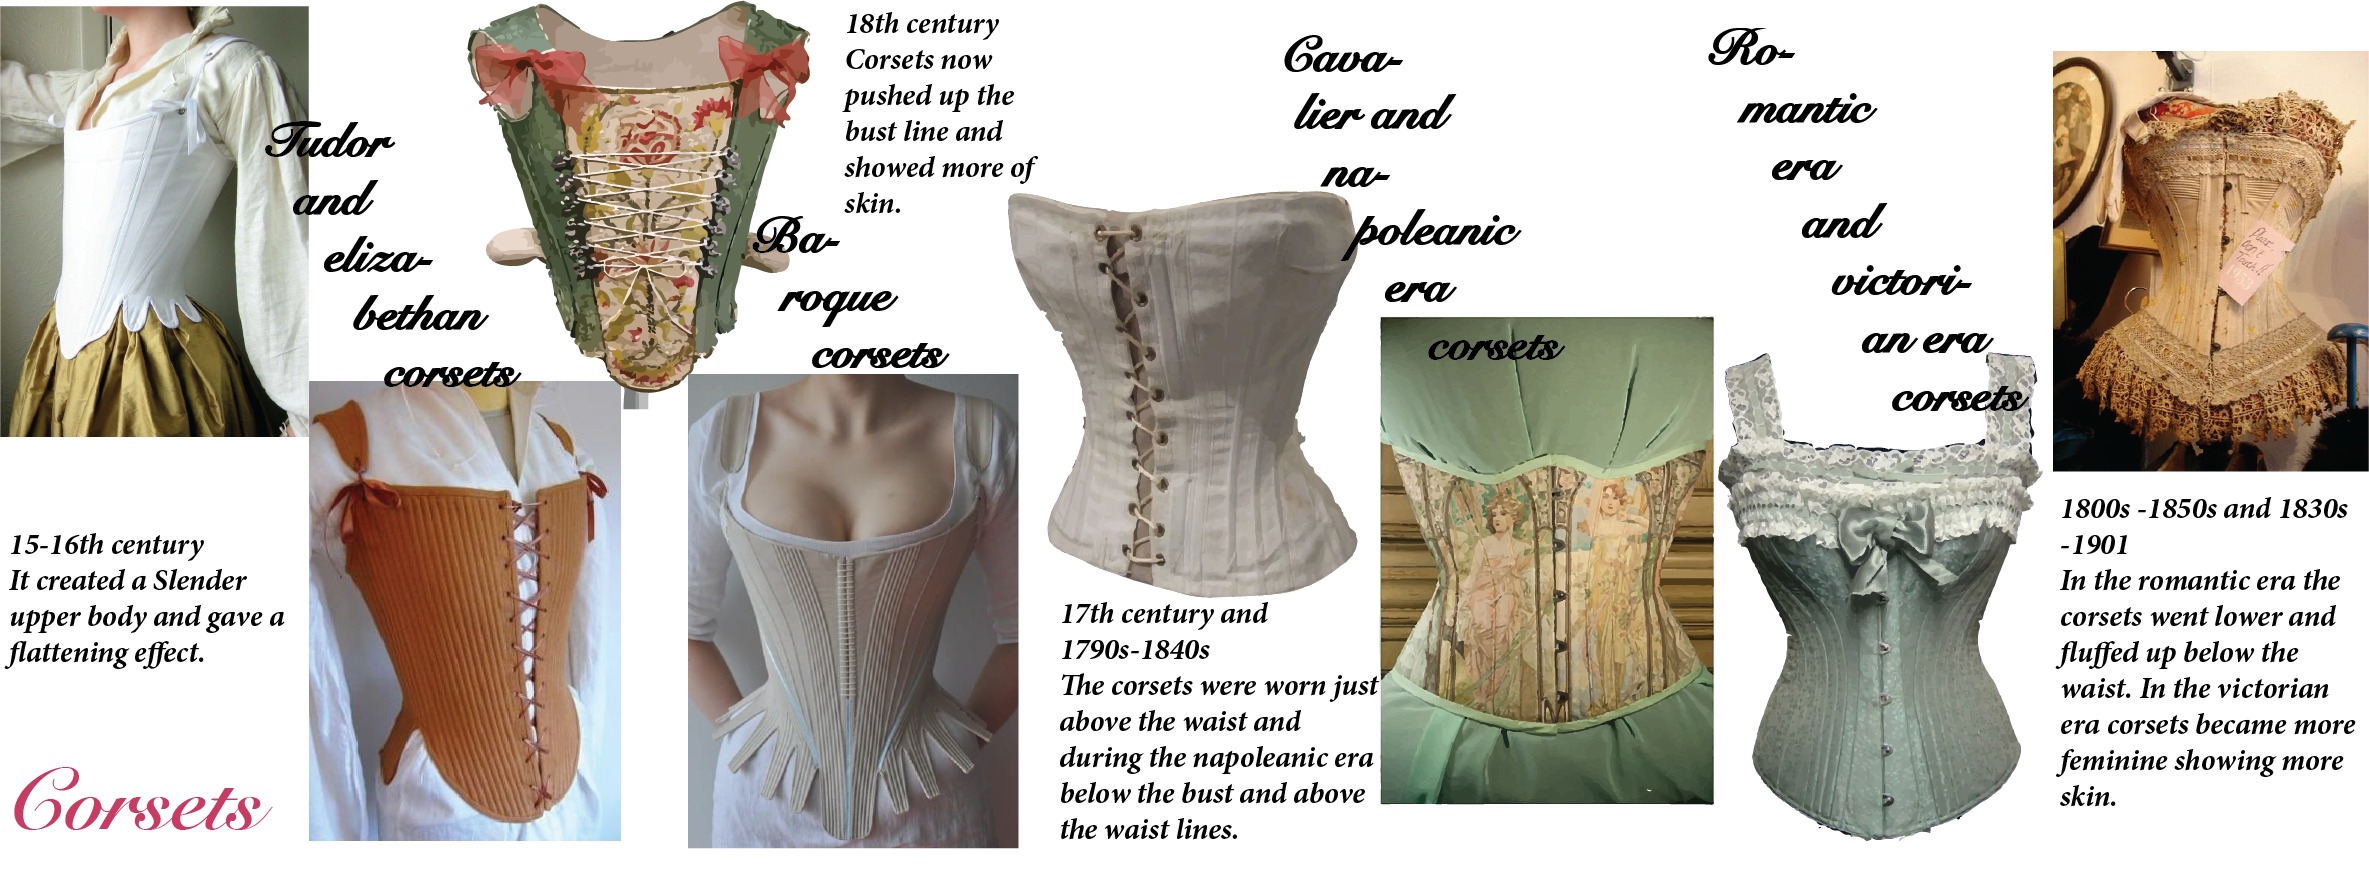 Corsets: Timeline and Evolution – Assignment 3 (Week 4)